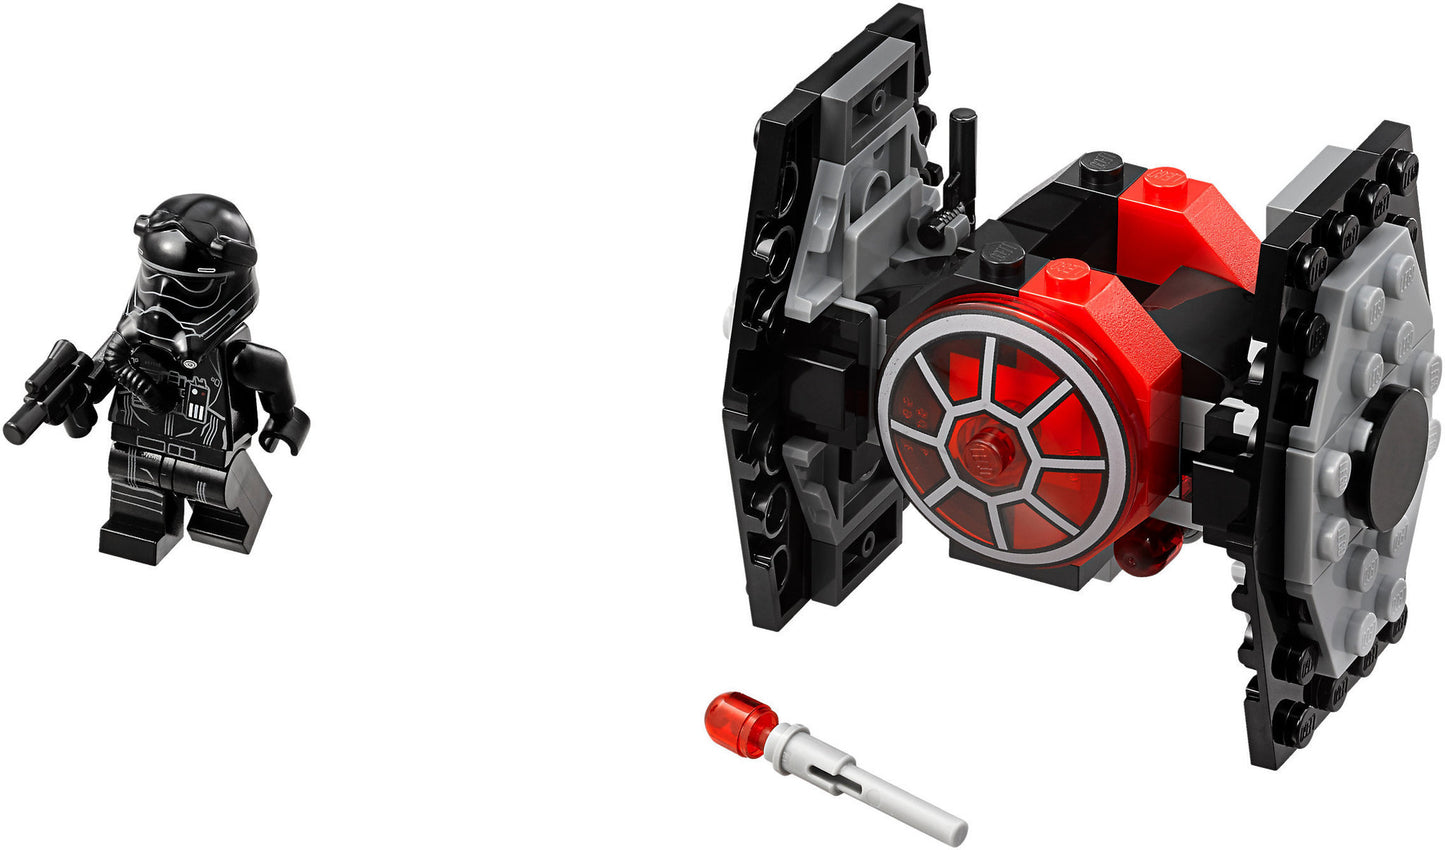 75194 LEGO Star Wars - Microfighter First Order Tie Fighter™